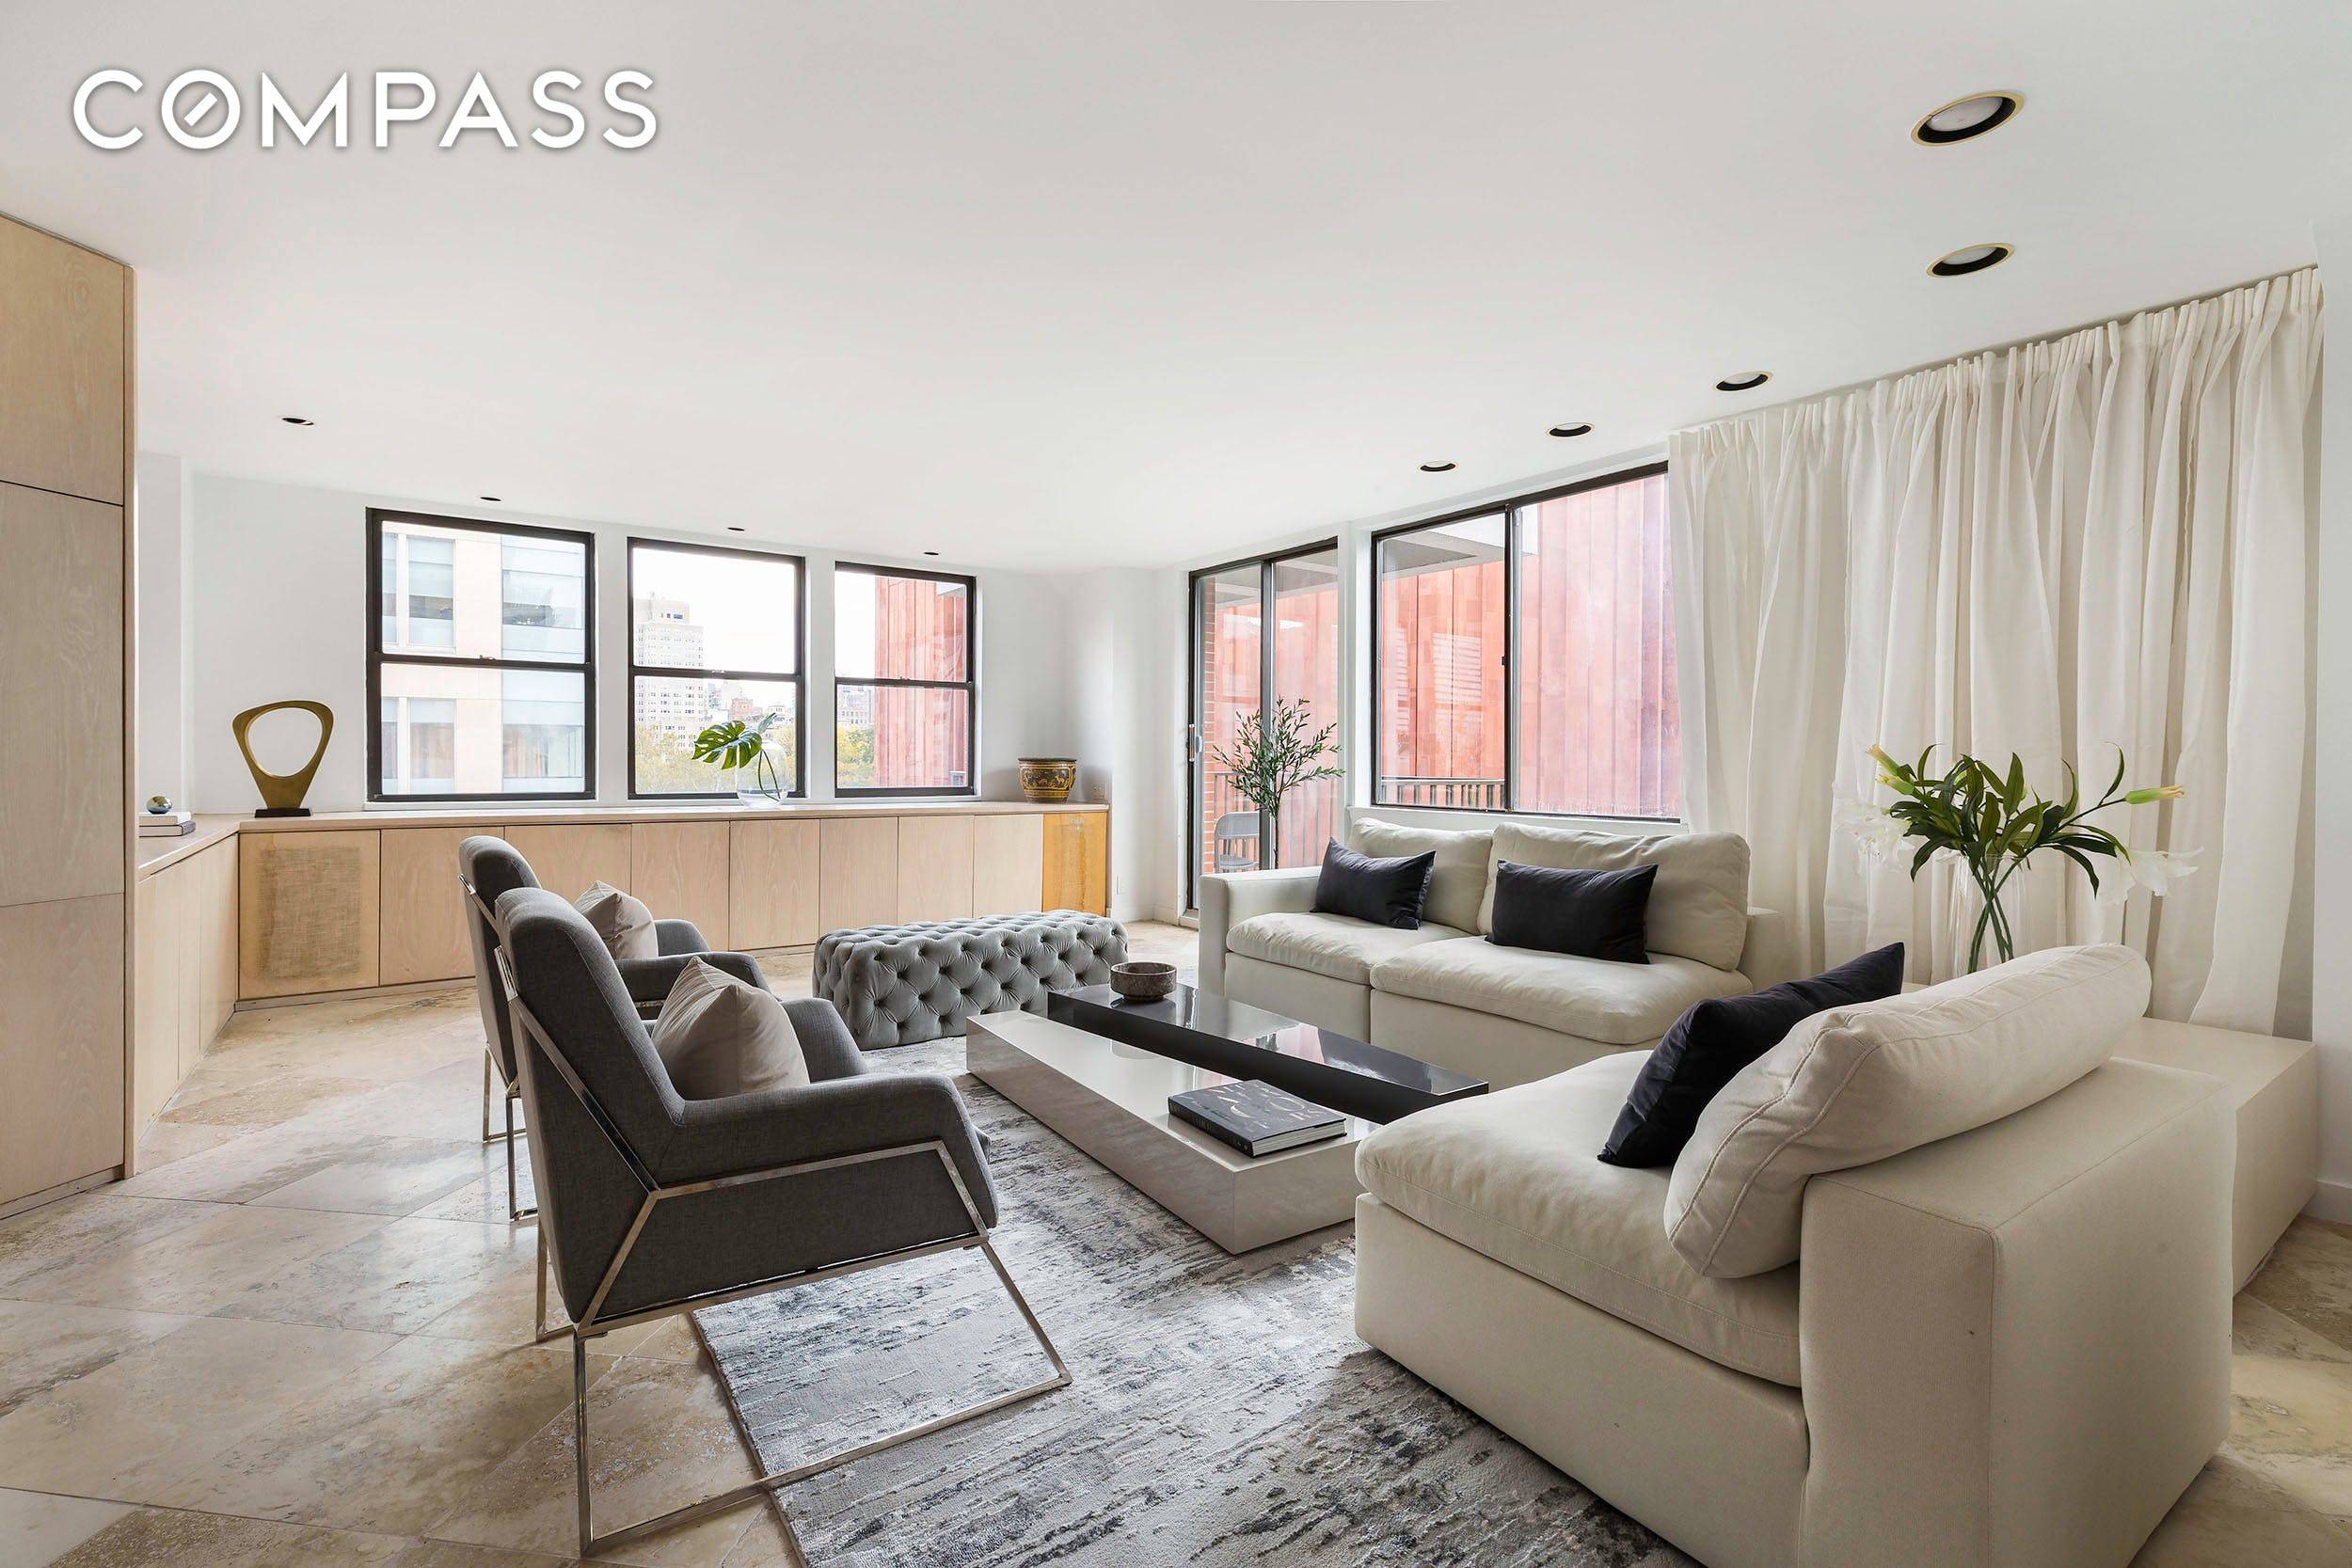 Rarely can you find an expansive full floor loft with 3 open exposures in central Greenwich Village with views of Washington Square Park from indoors and out.